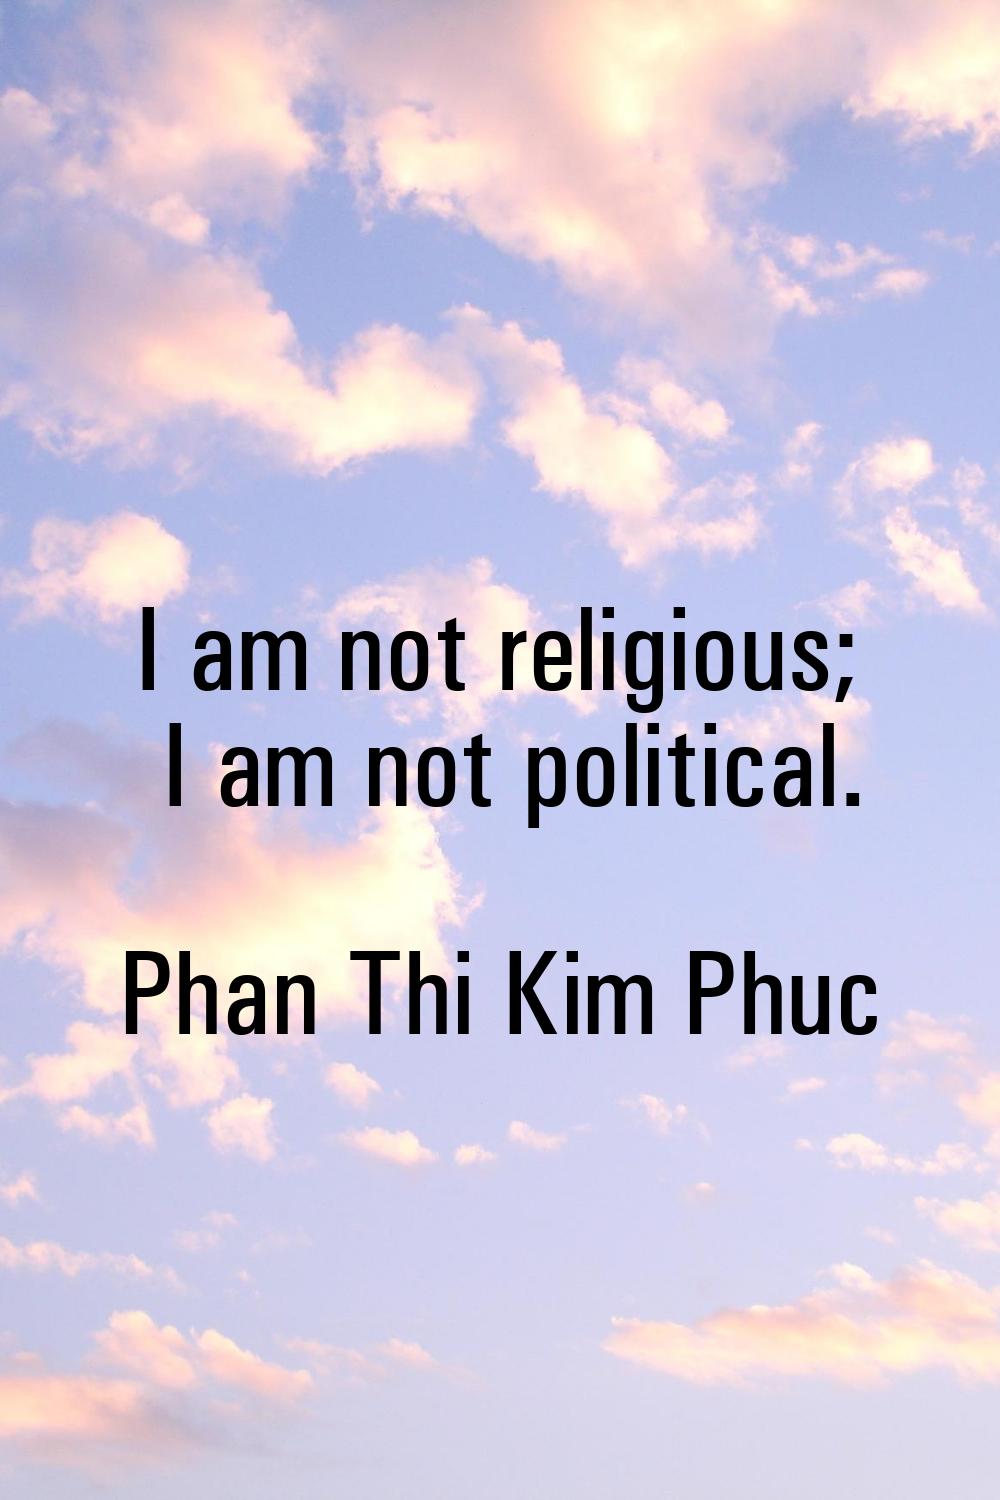 I am not religious; I am not political.